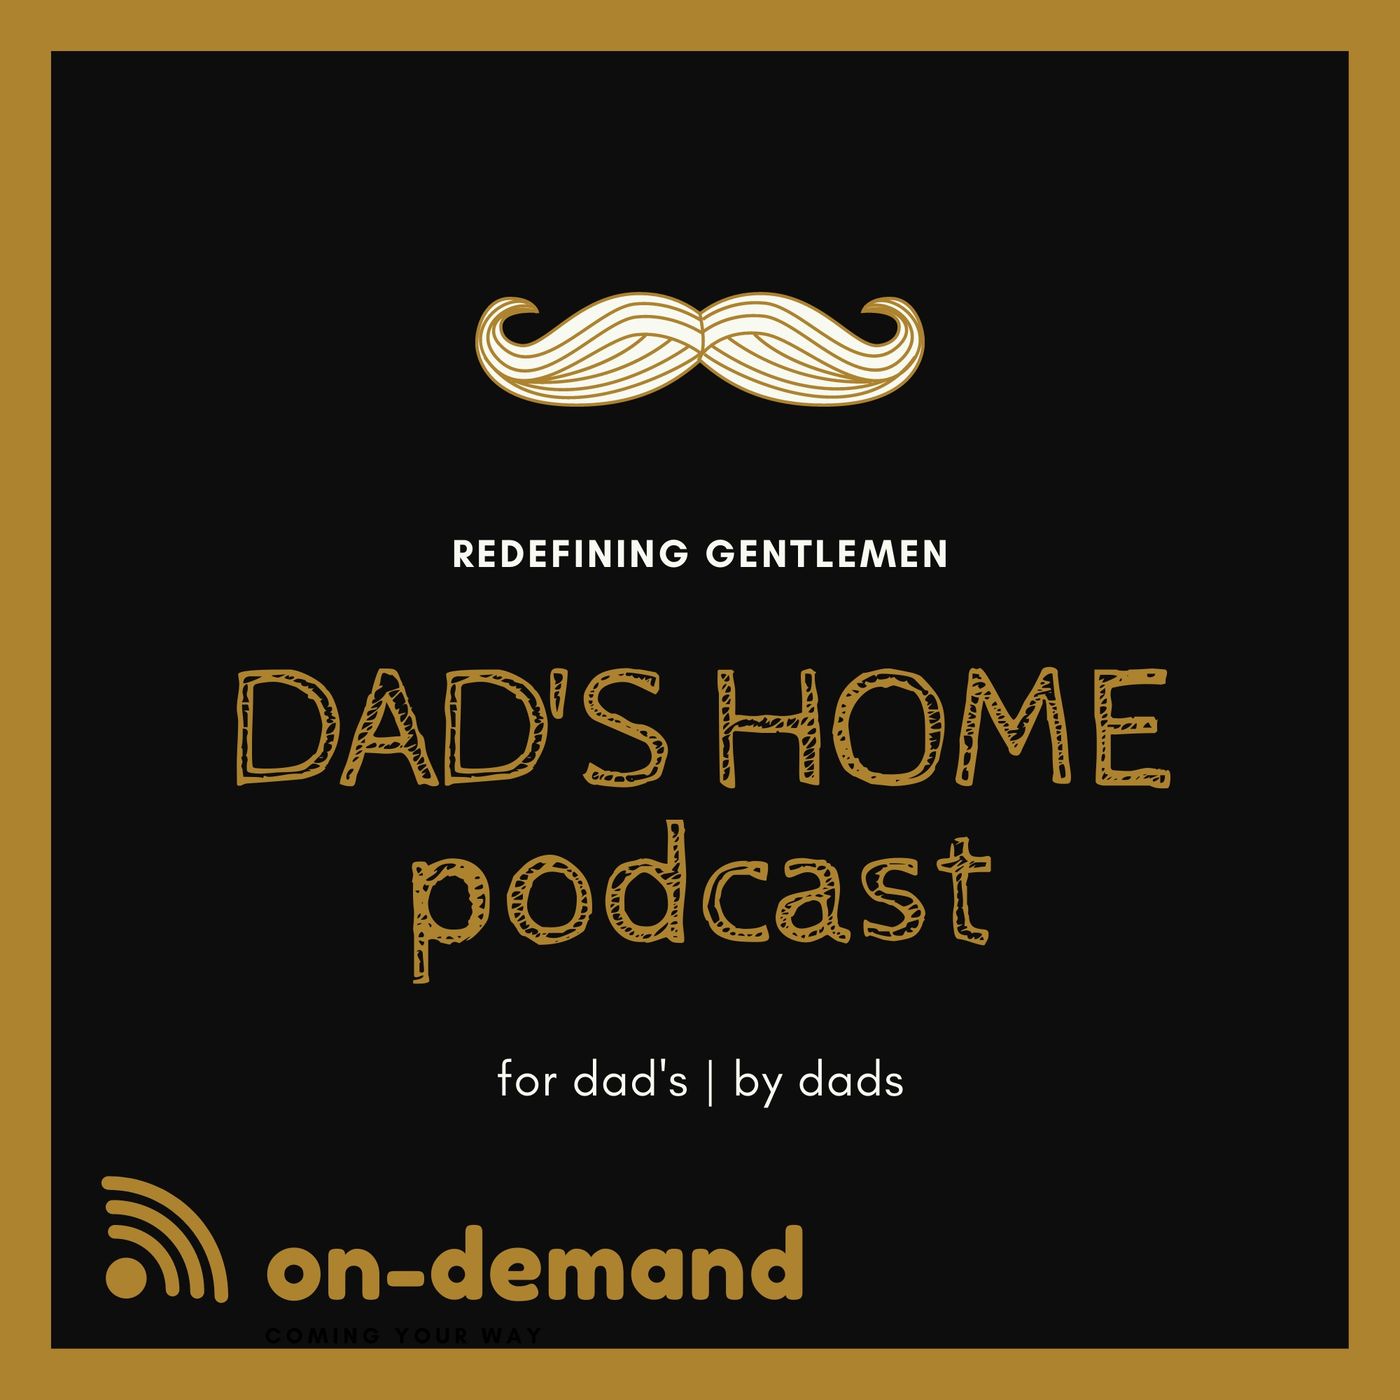 Dad's Home Podcast | Season 002 | Episode #203 | 